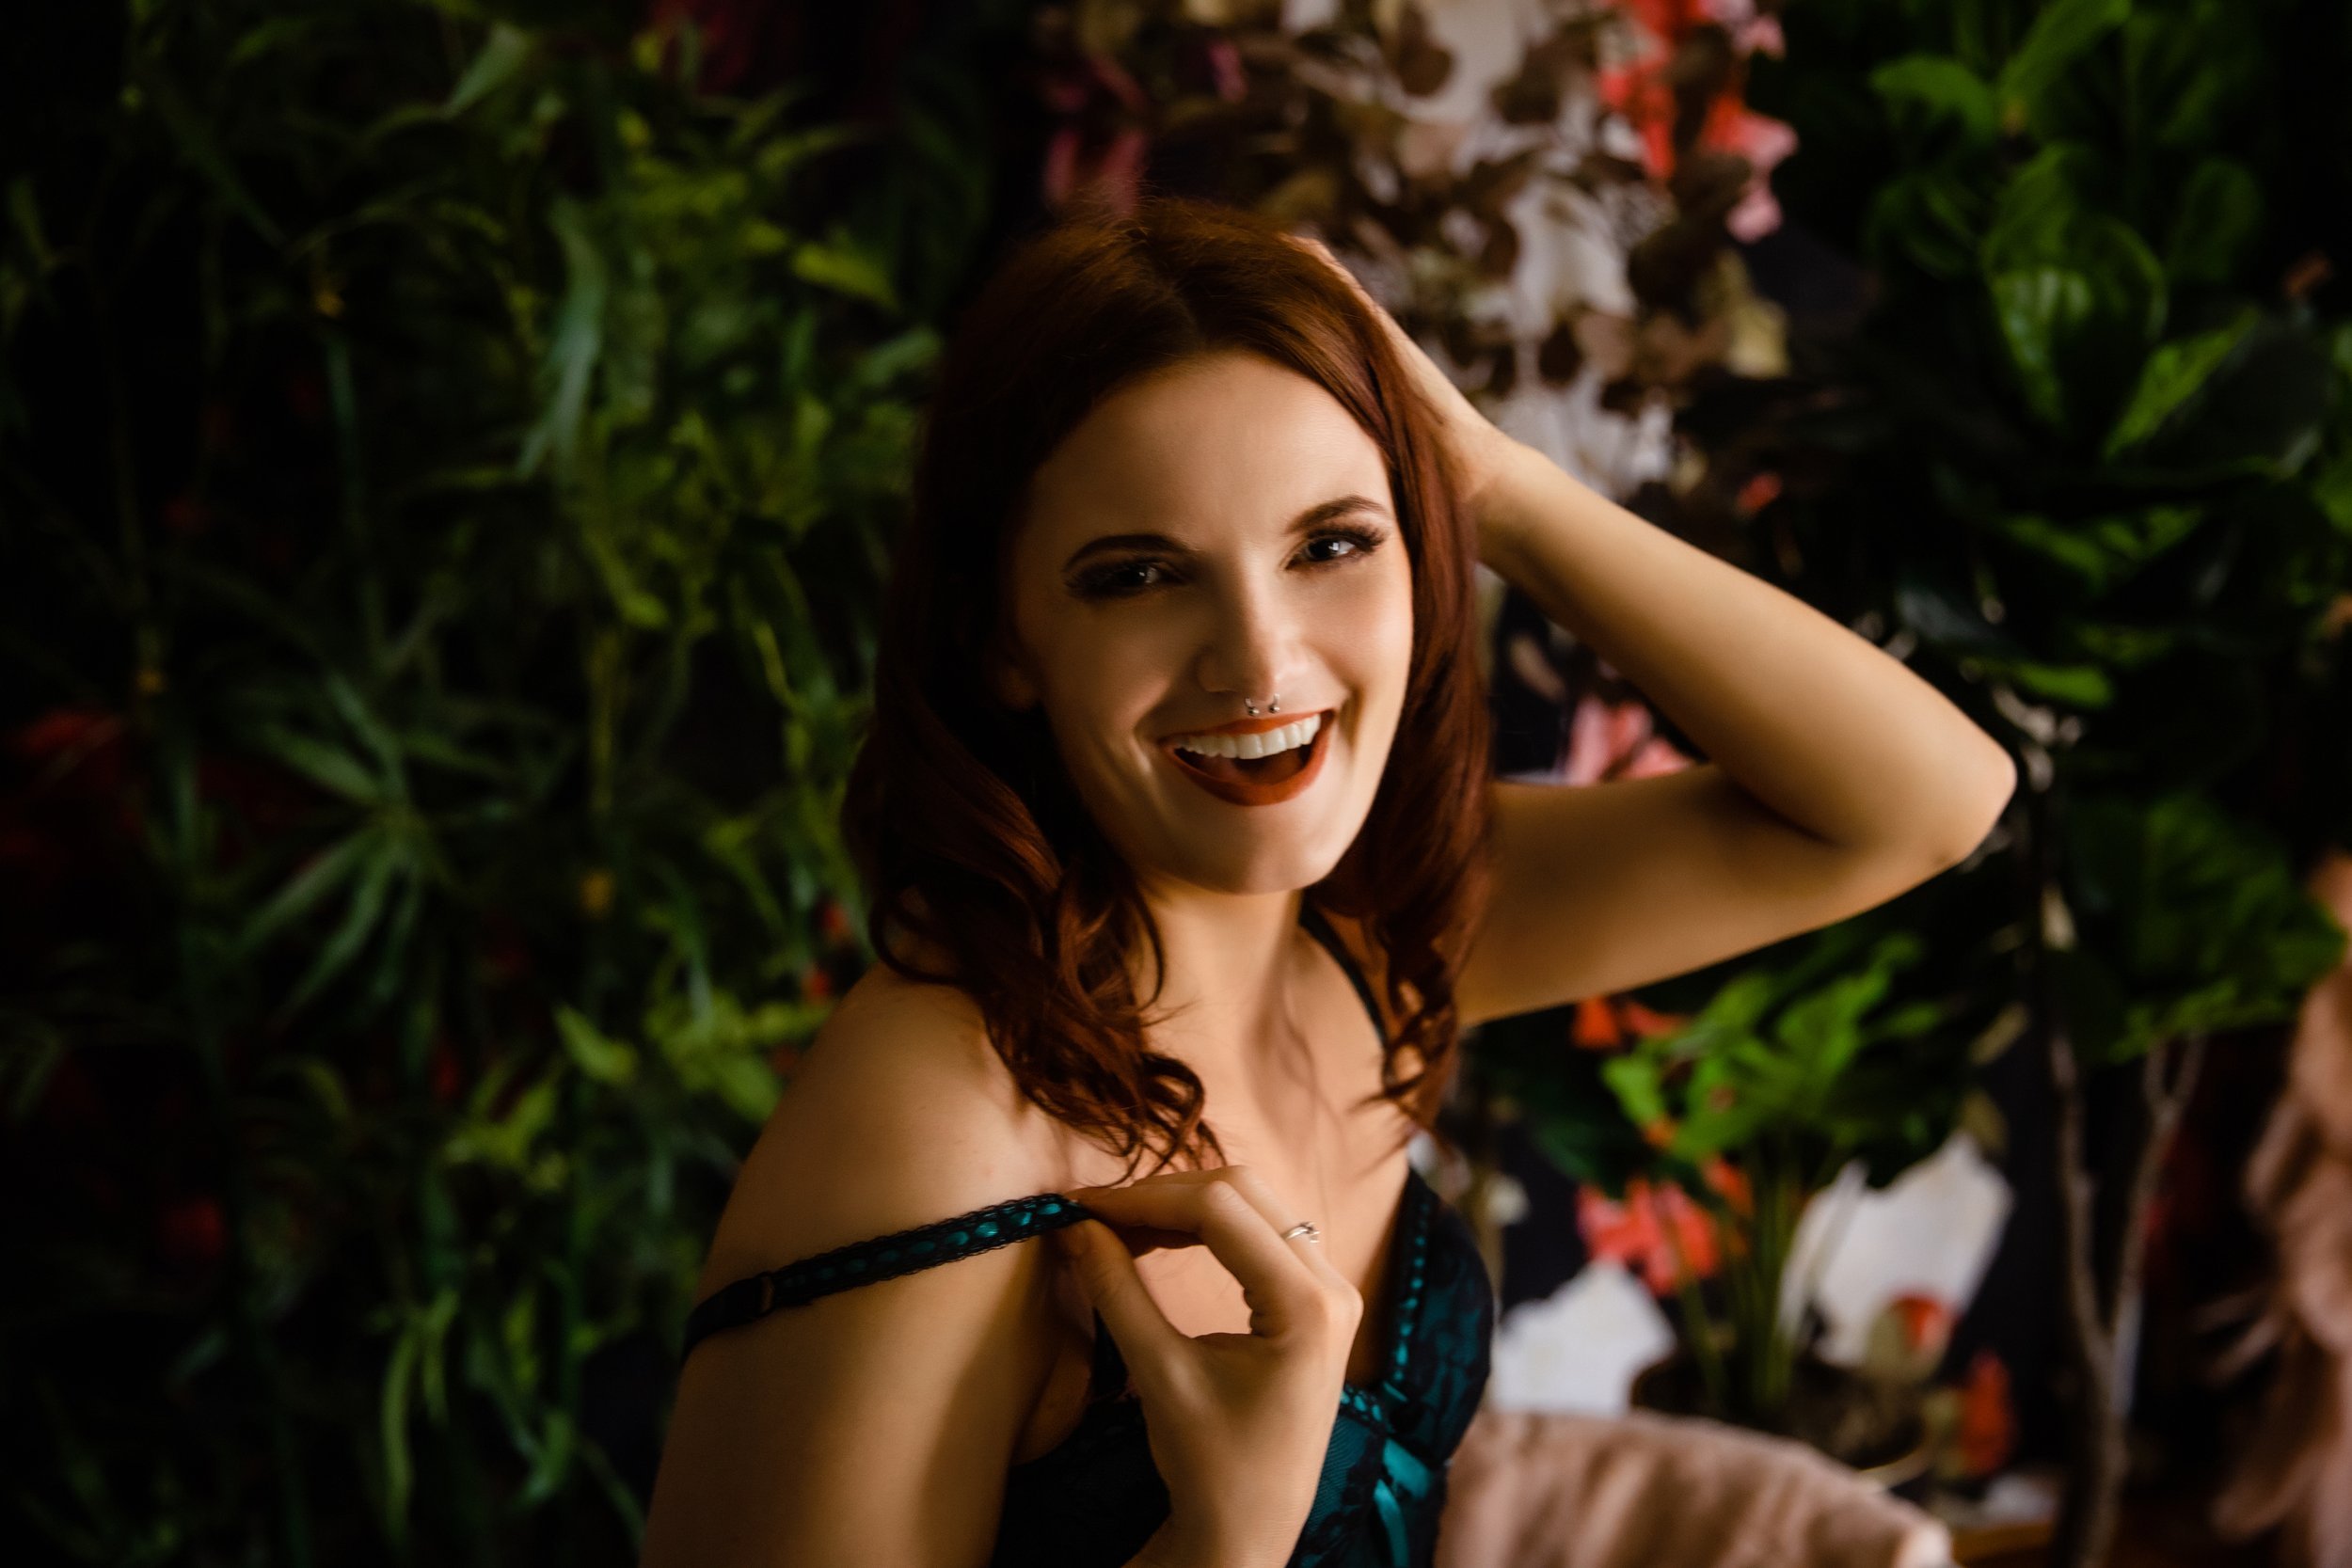 A woman in a green dress posing for a photo at the New Boudoir Studio.